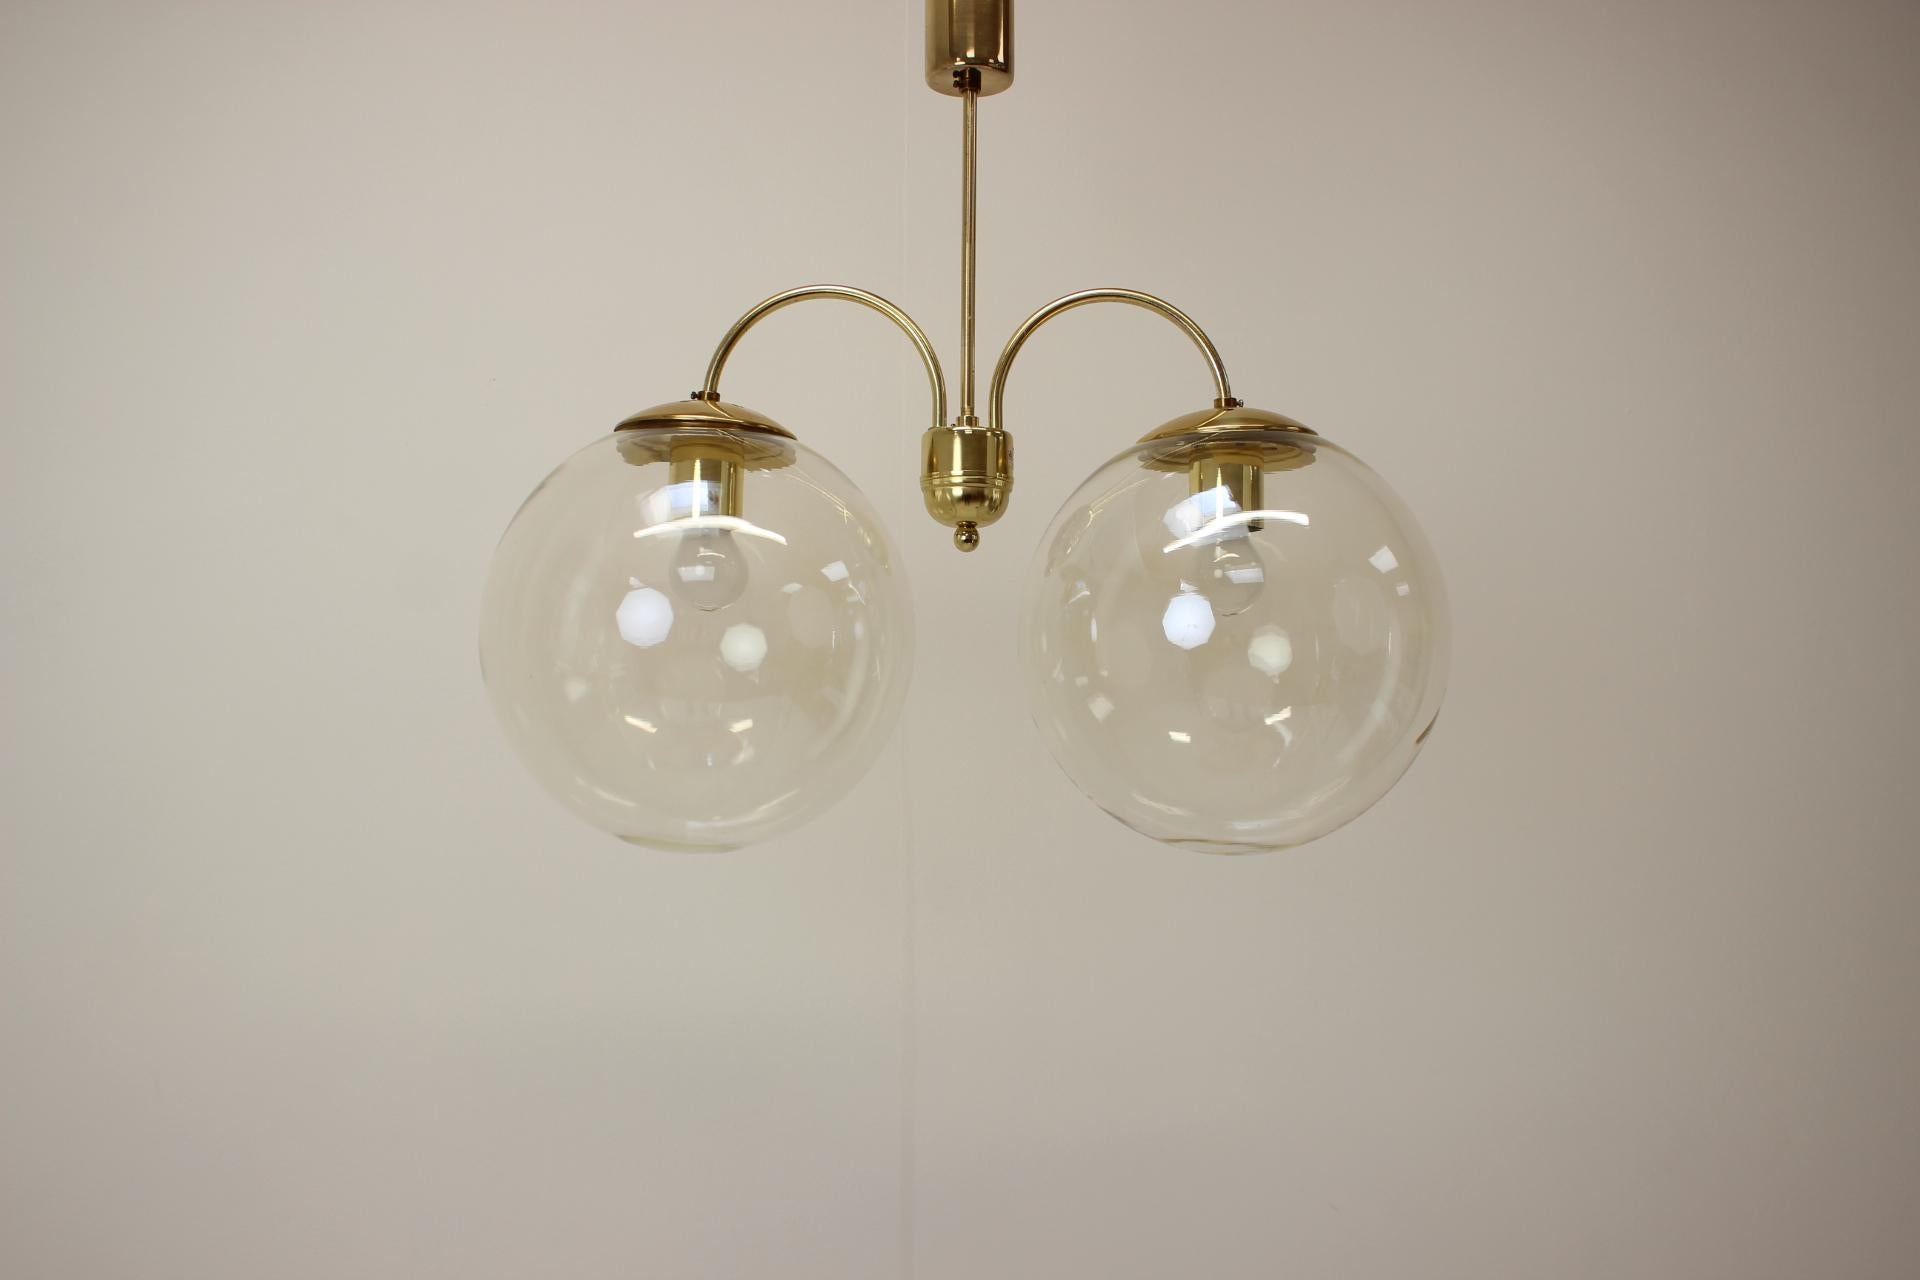 Made in Czechoslovakia
Made of glass, brass
With aged patina
2x E27 or E26 bulb
Re-polished
Fully functional
Good original condition
US wiring compatible.